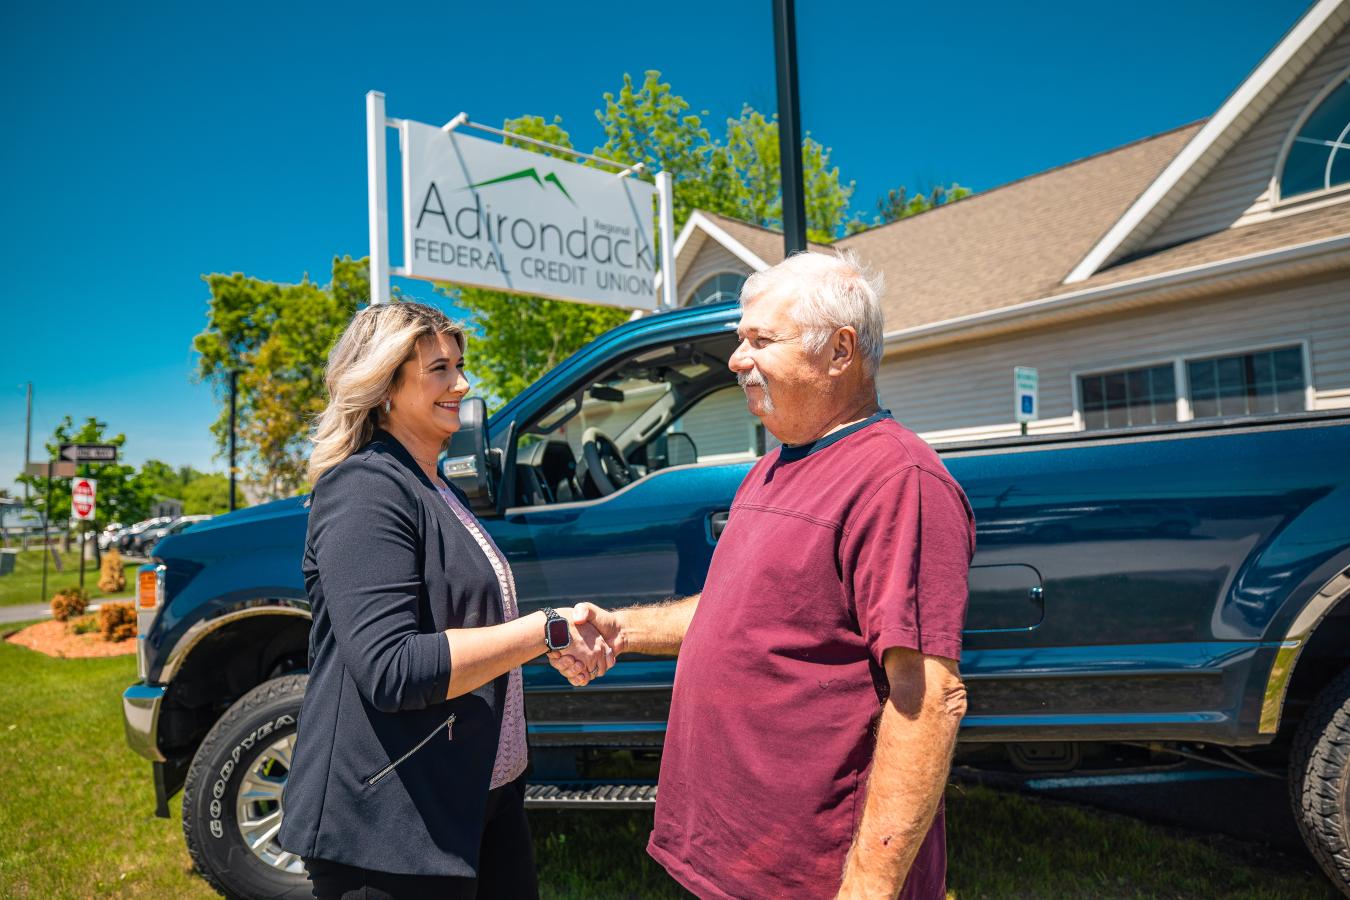 Expert loan officer at the credit union shaking hands with a new car owner after getting a loan